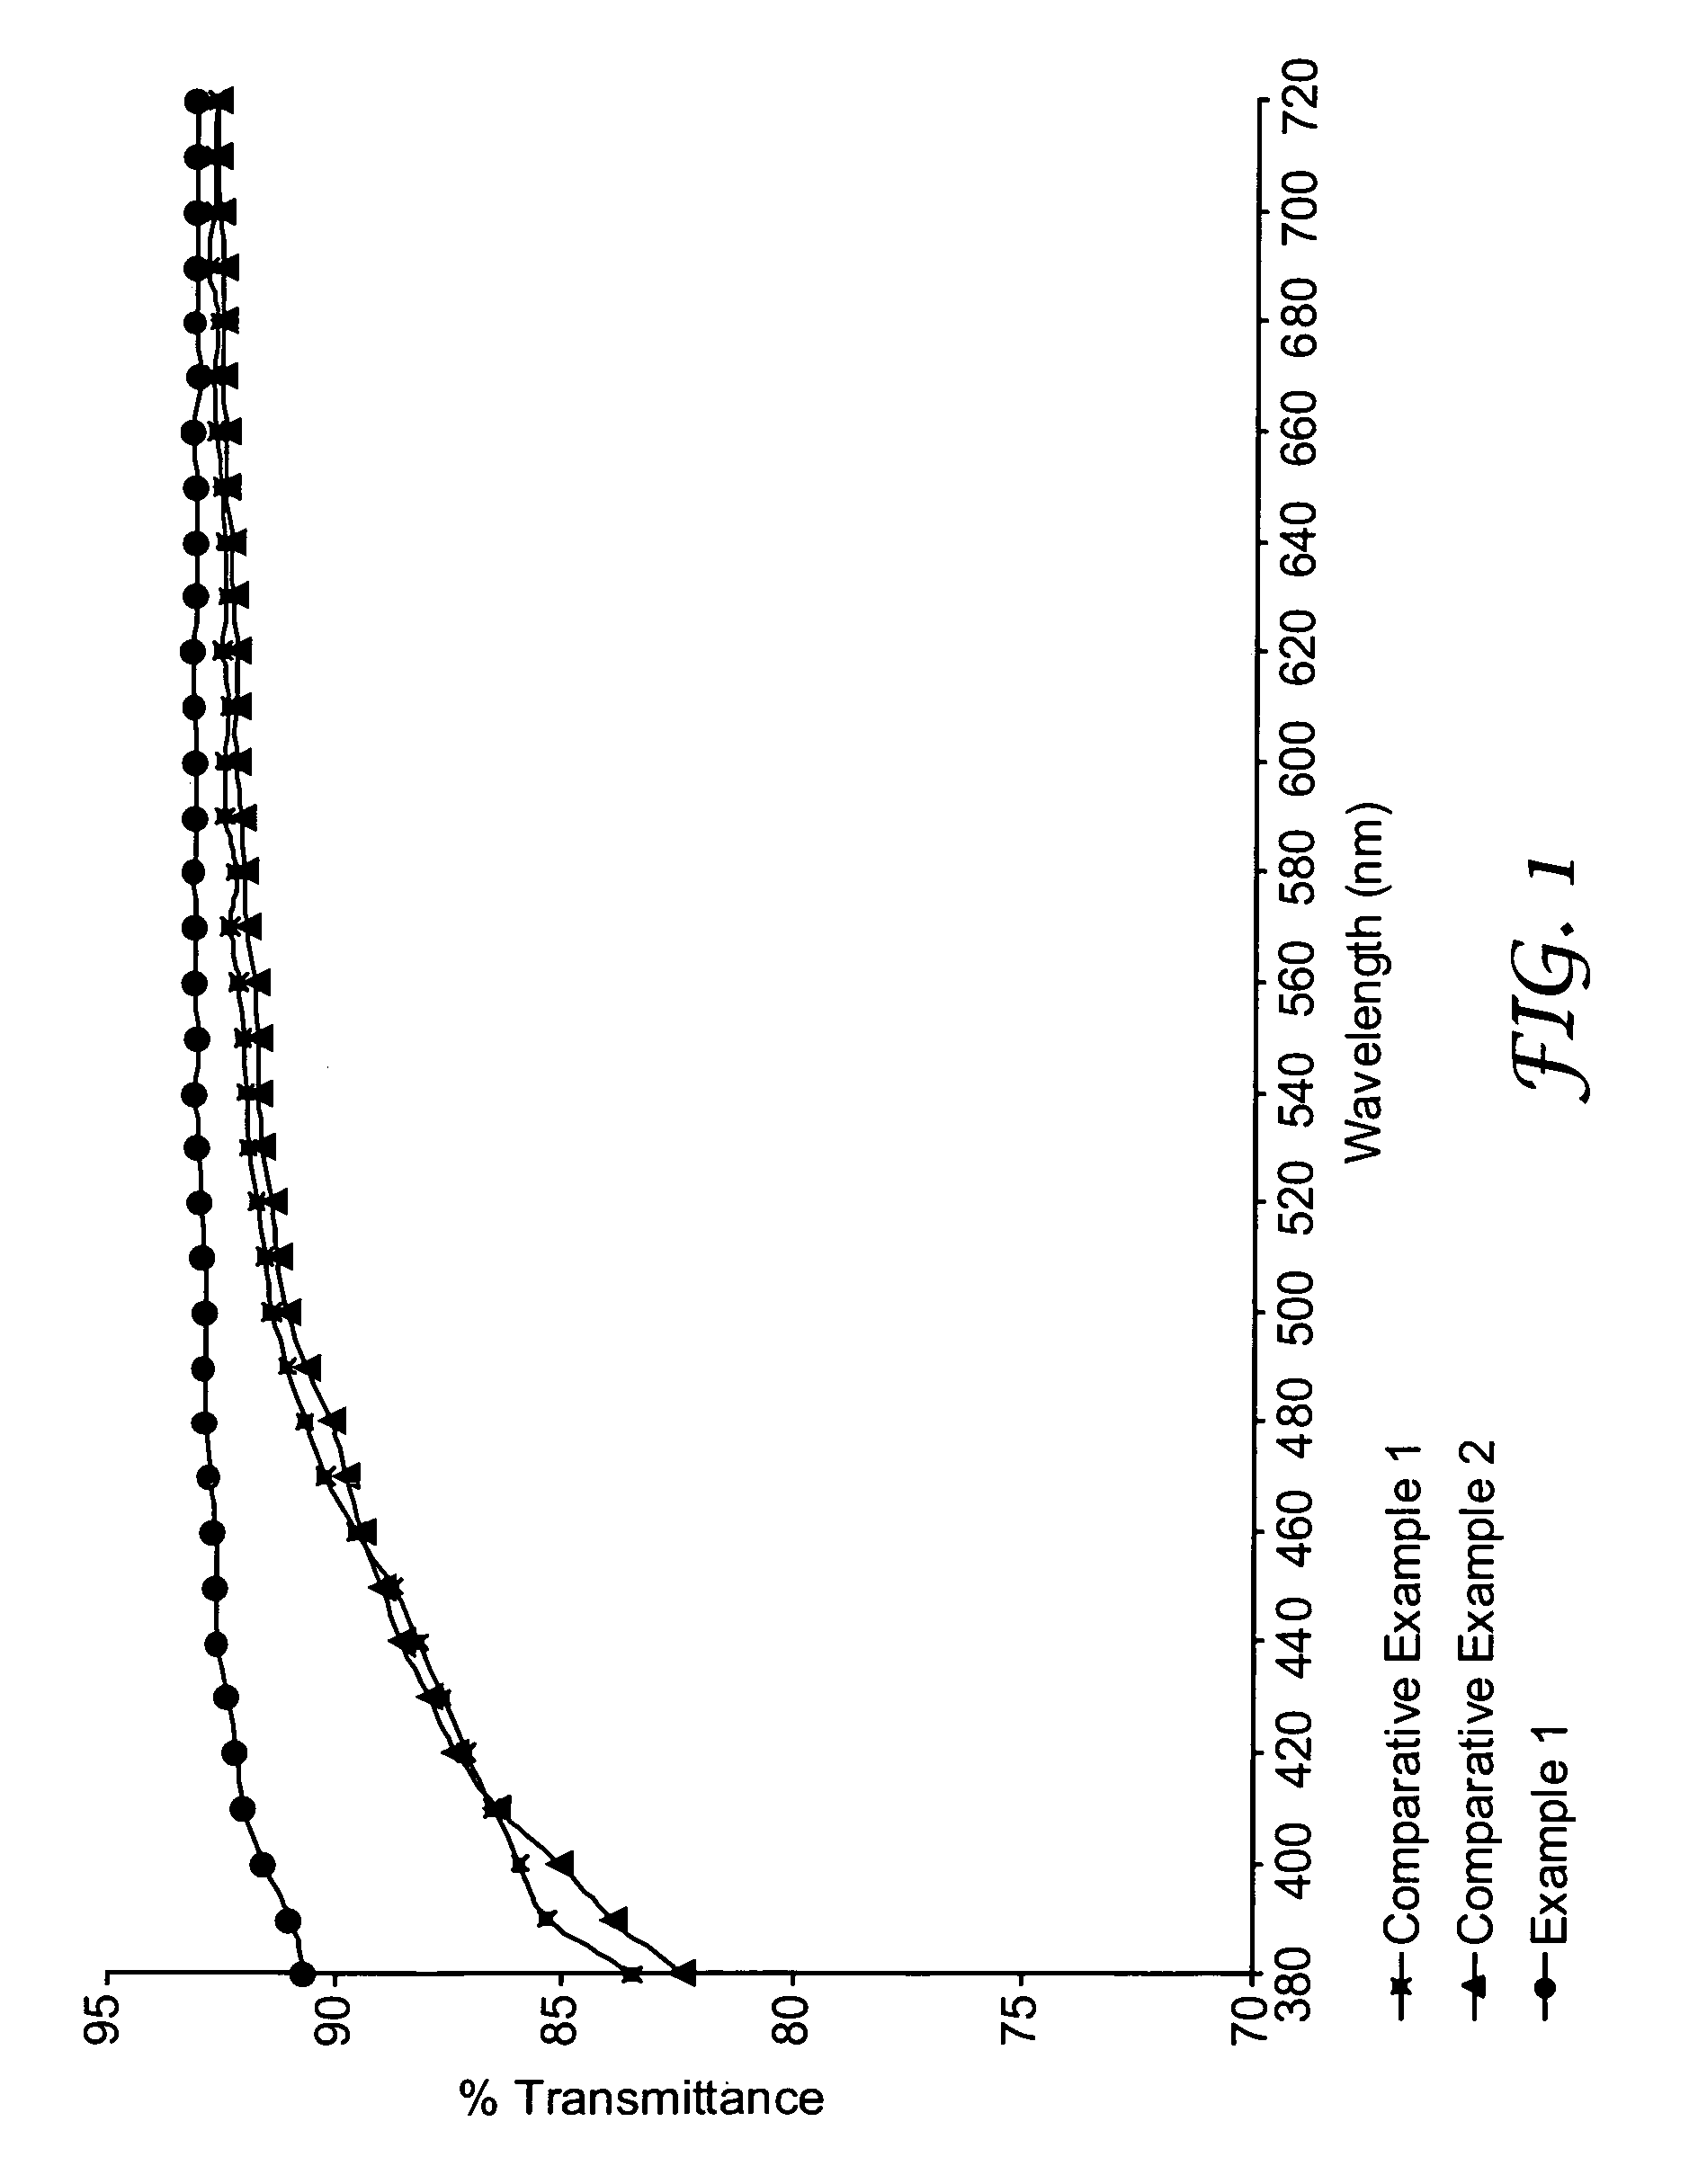 Curable thiol-ene compositions for optical articles